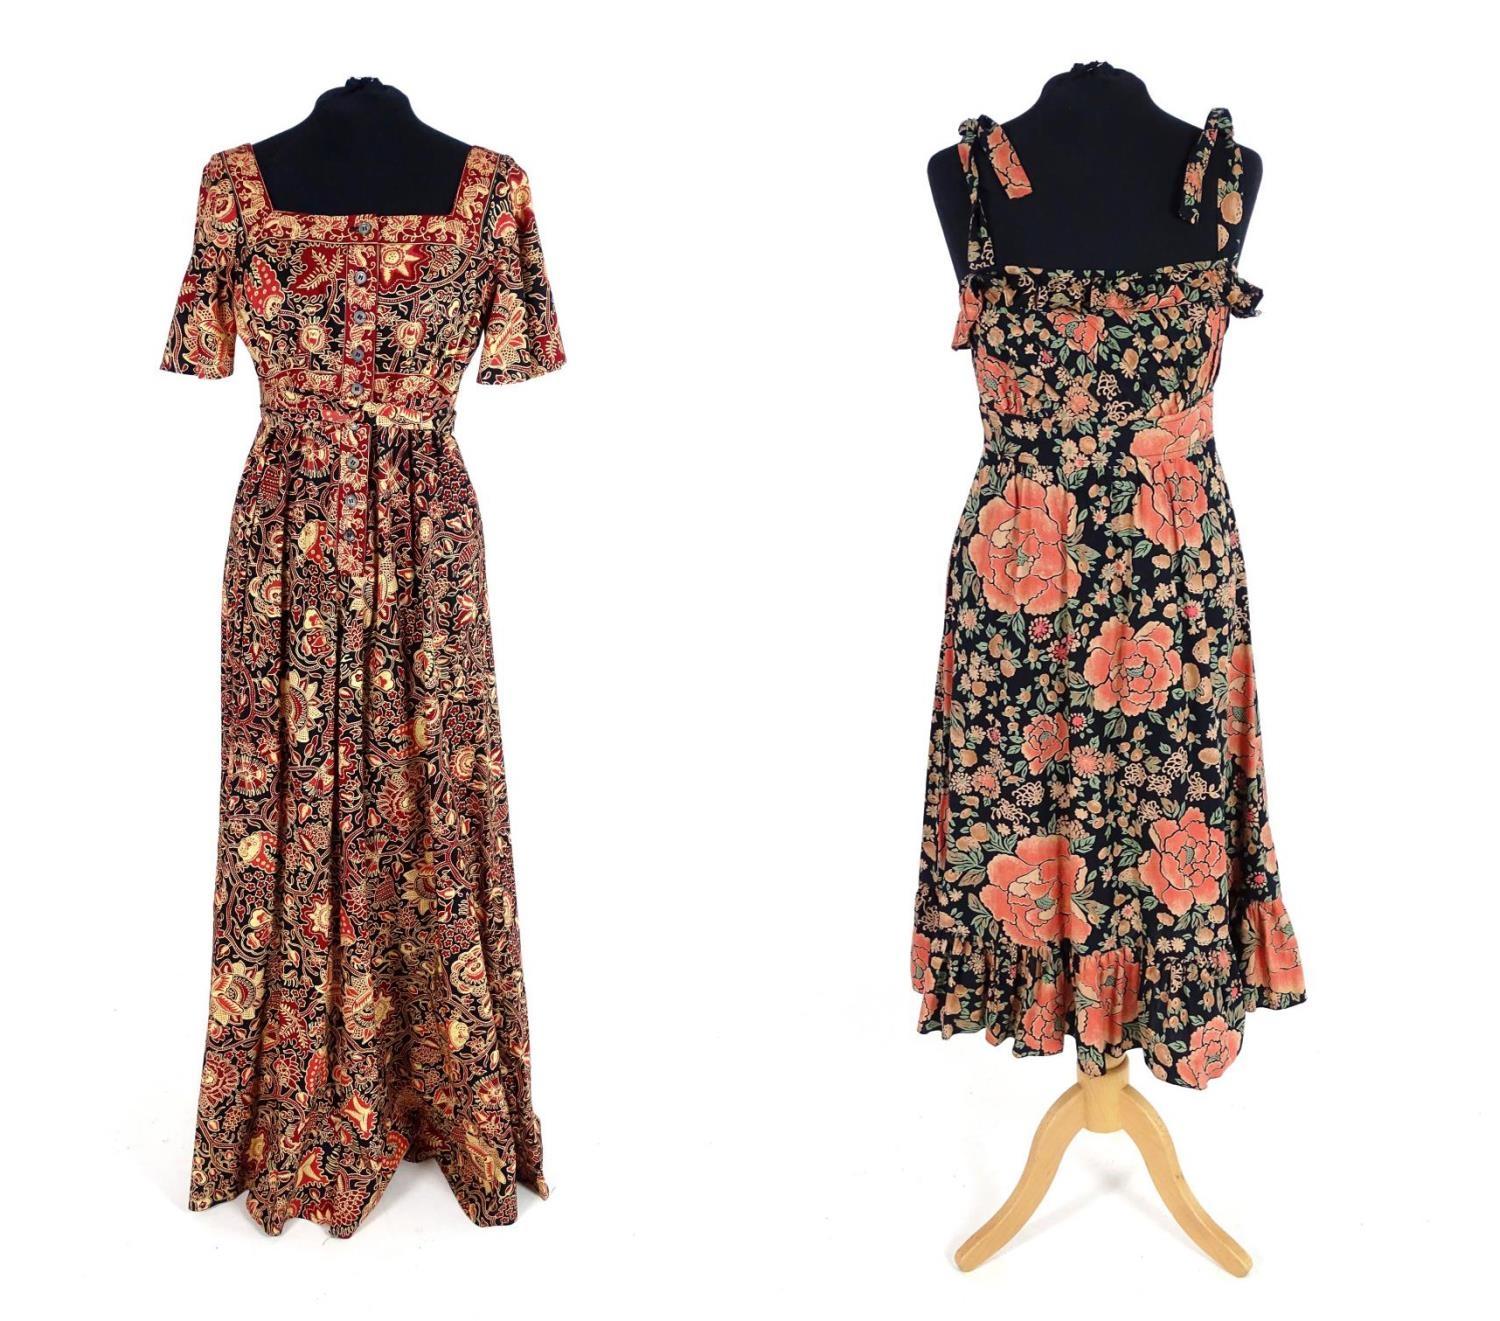 Two vintage dresses, c 1980's, from Clothes by Samuel Sherman. A cotton knee length patterned summer